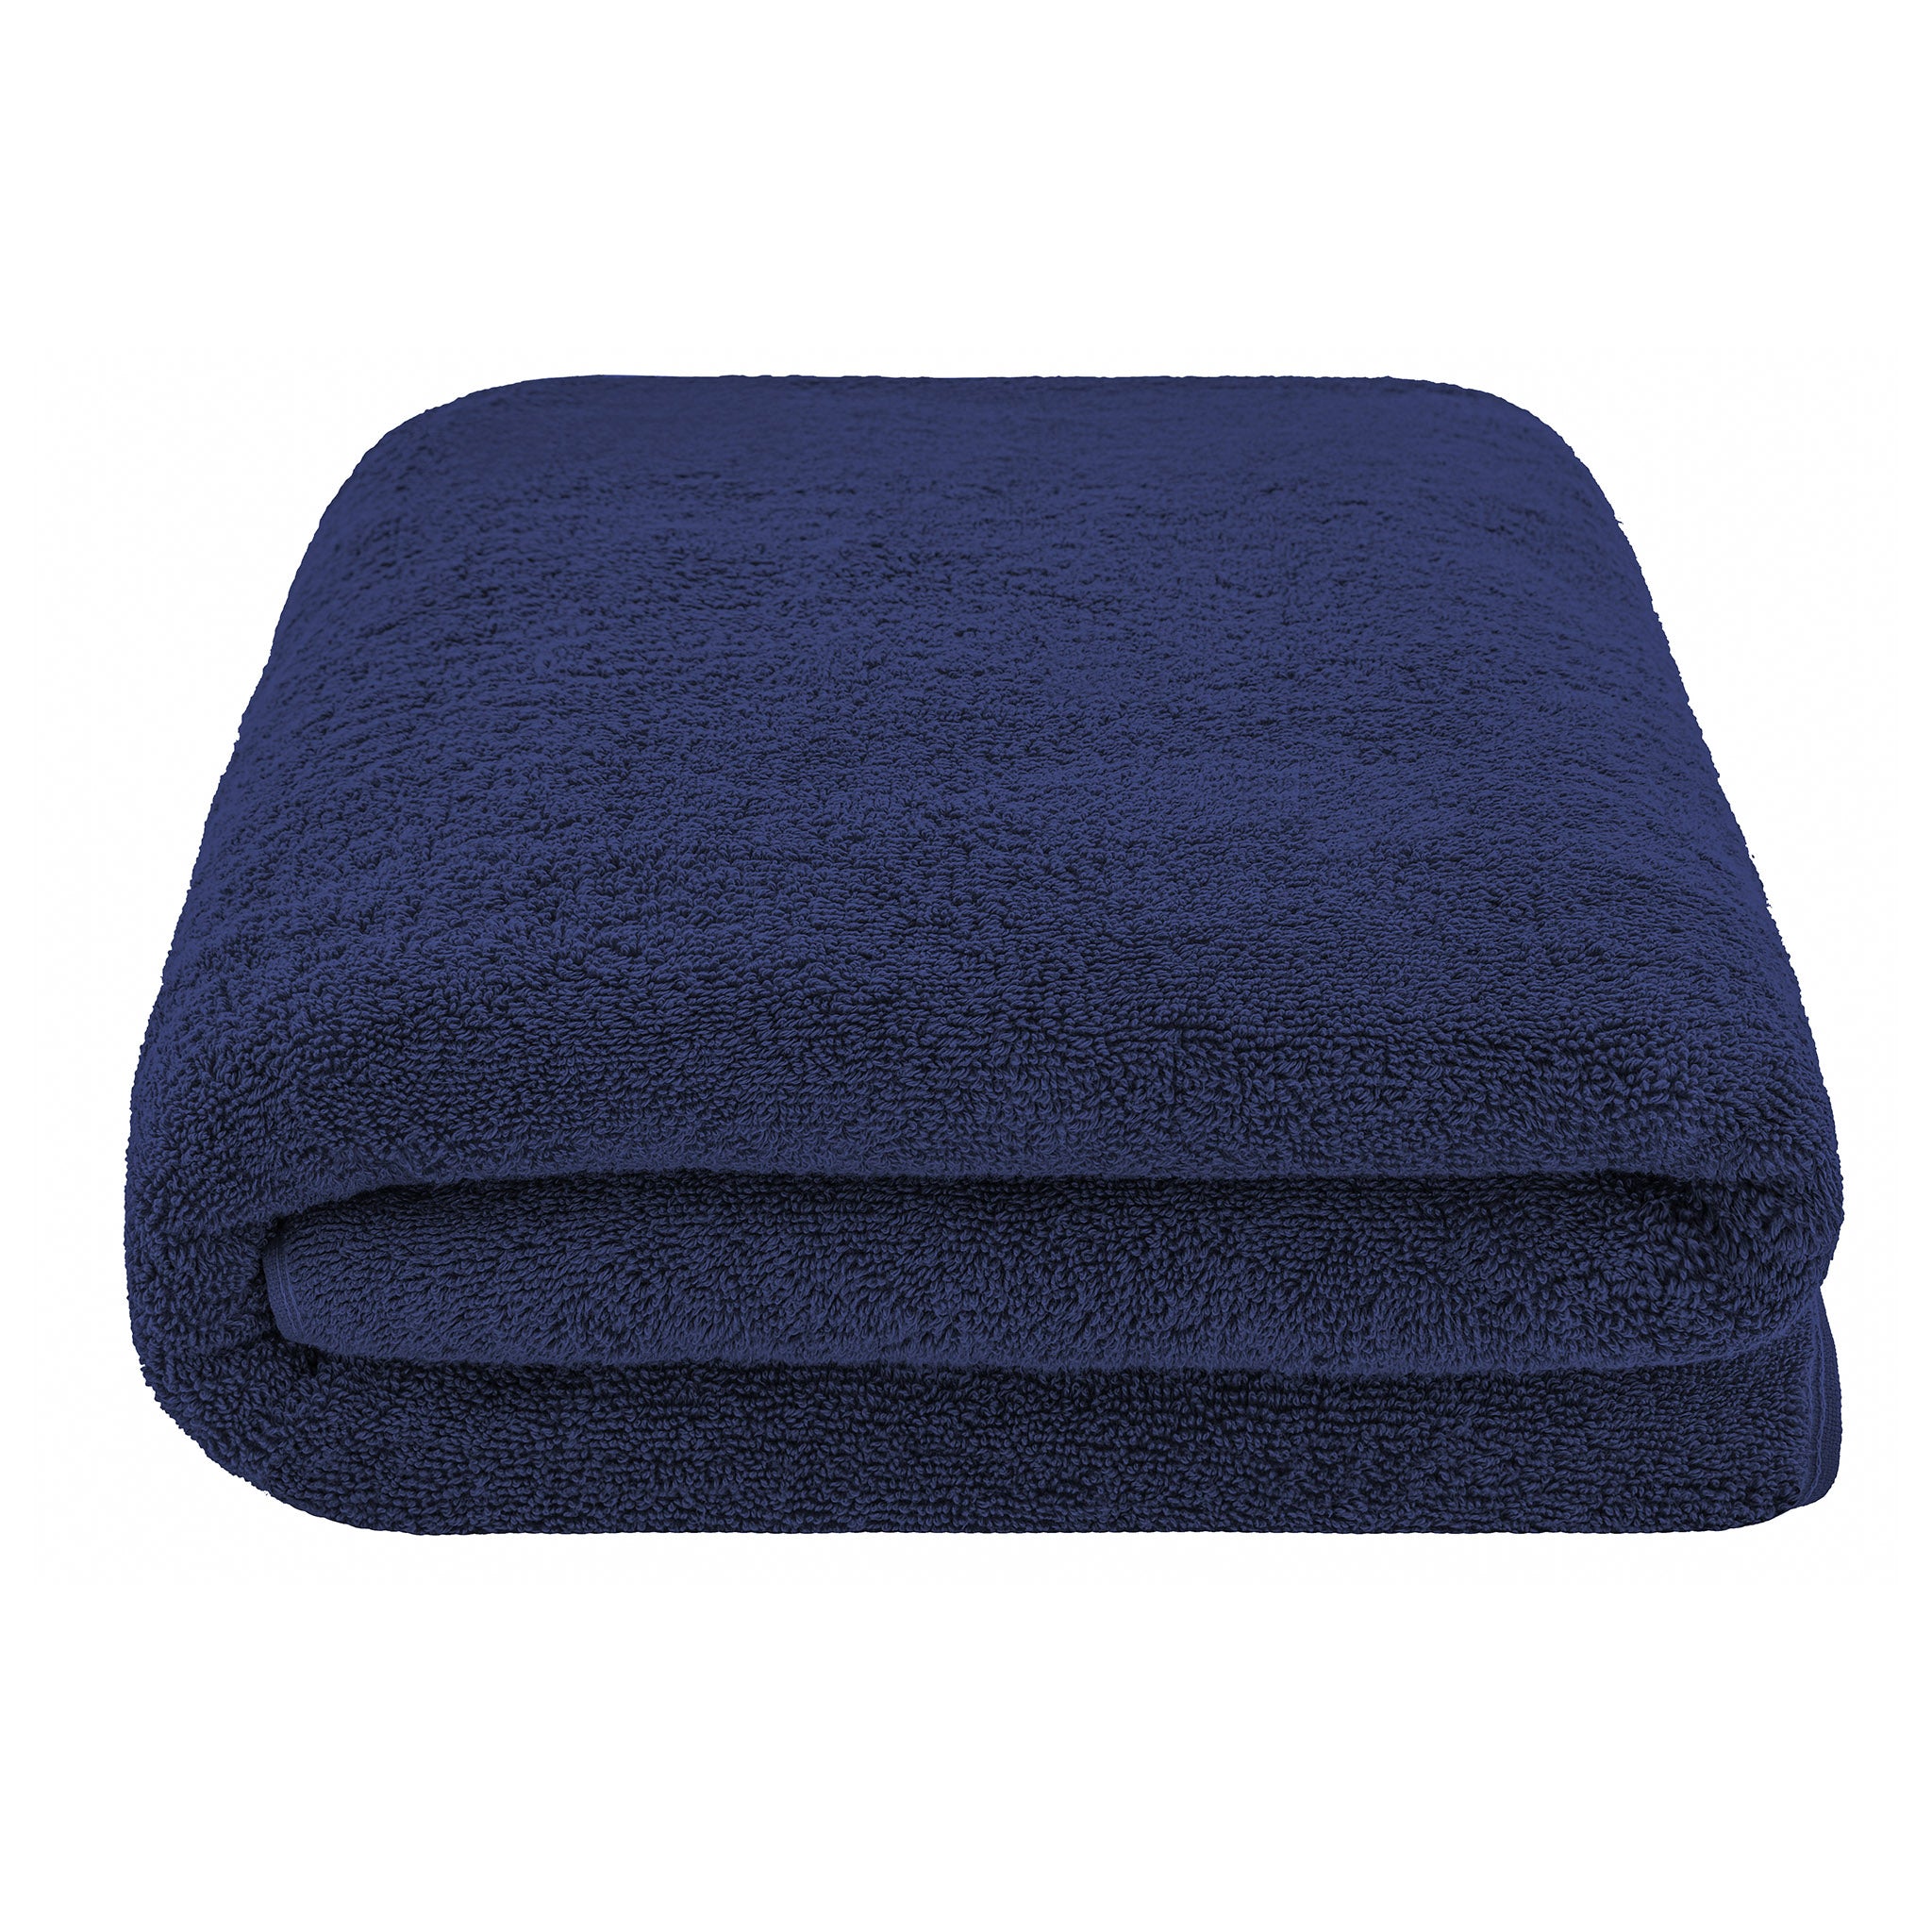 American Soft Linen 100% Ring Spun Cotton 40x80 Inches Oversized Bath Sheets navy-blue-3